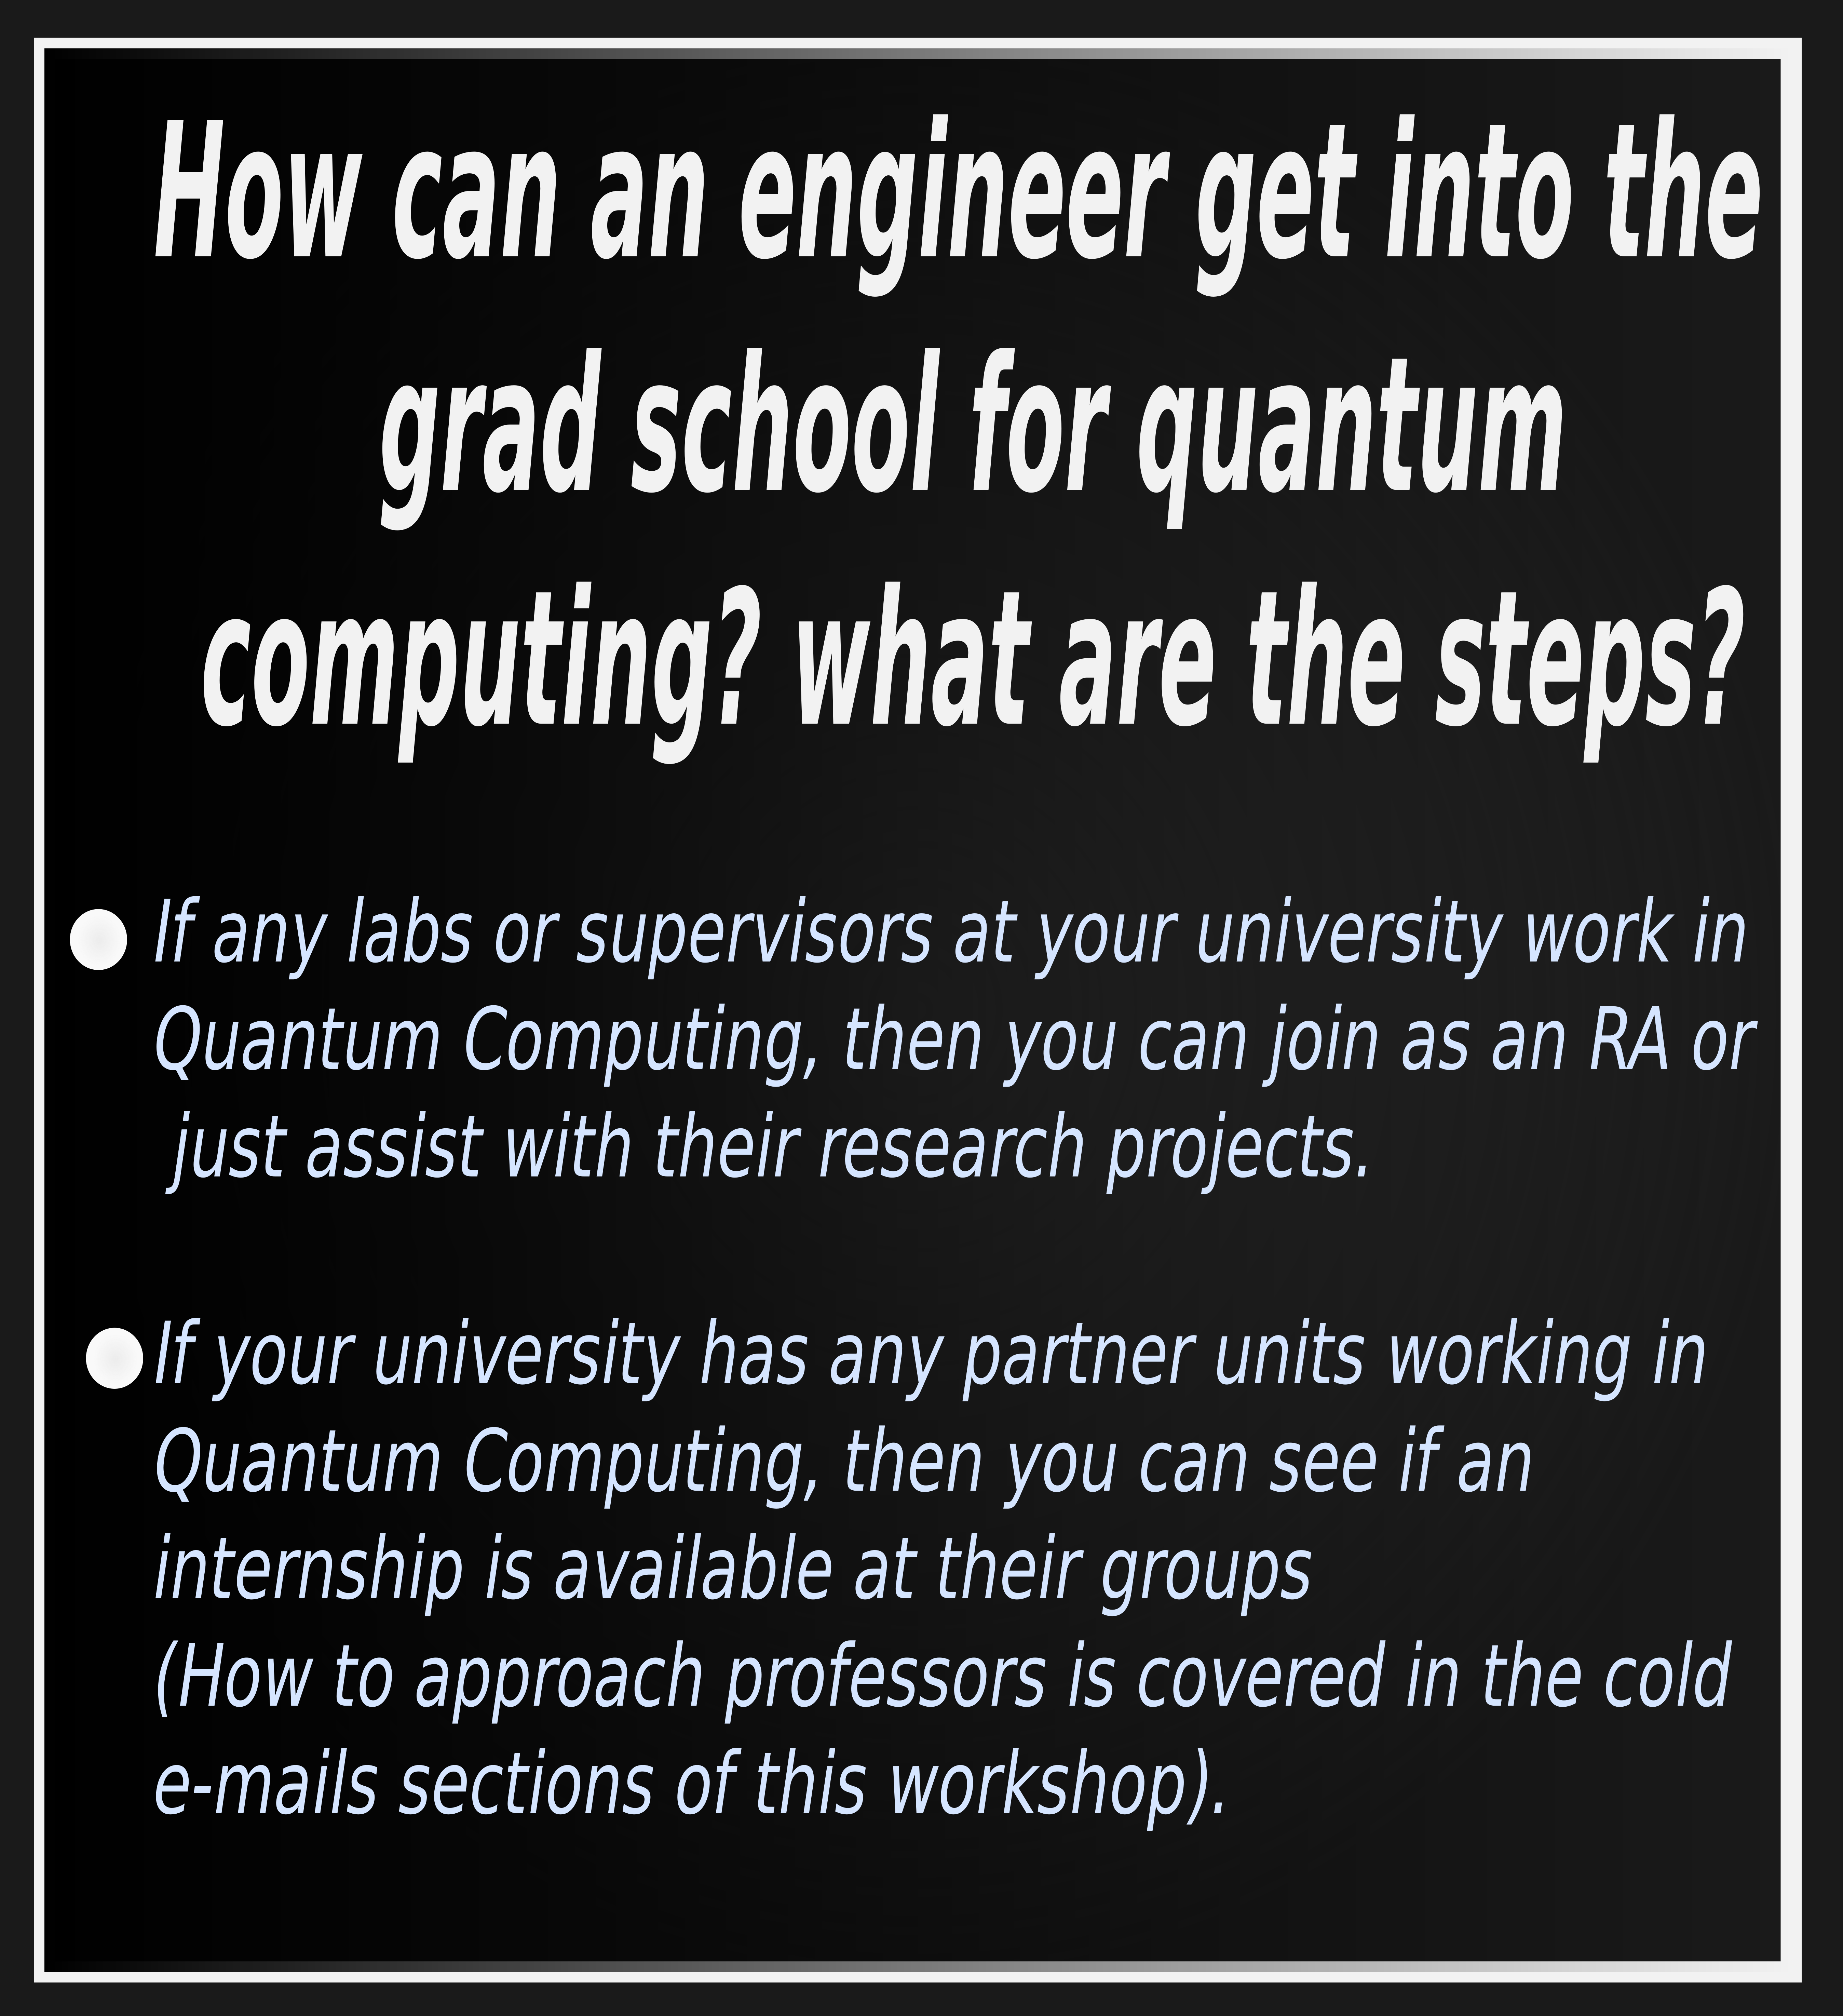 How can an engineer get into grad school for quantum computing?  What are the steps?